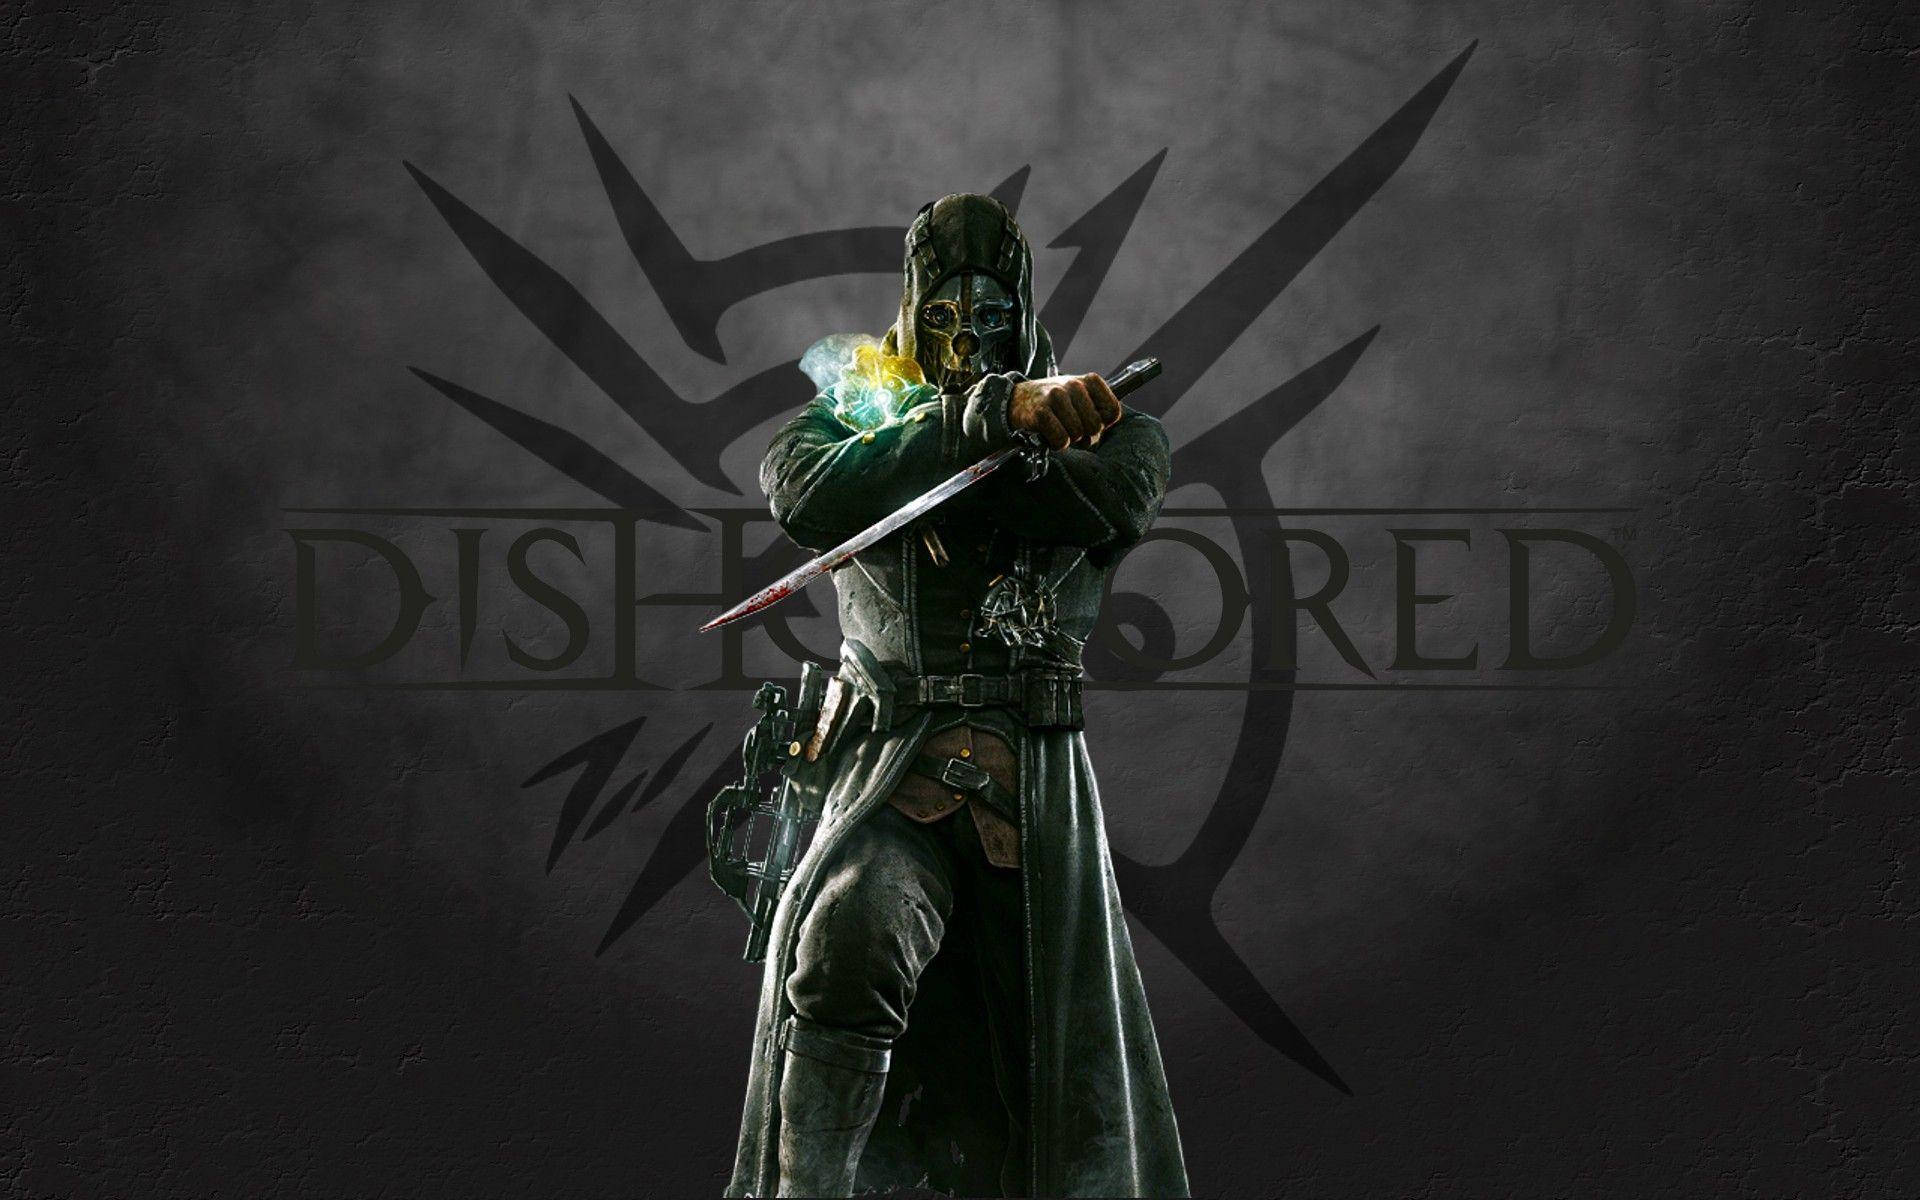 Cool Dishonored Design Wallpaper